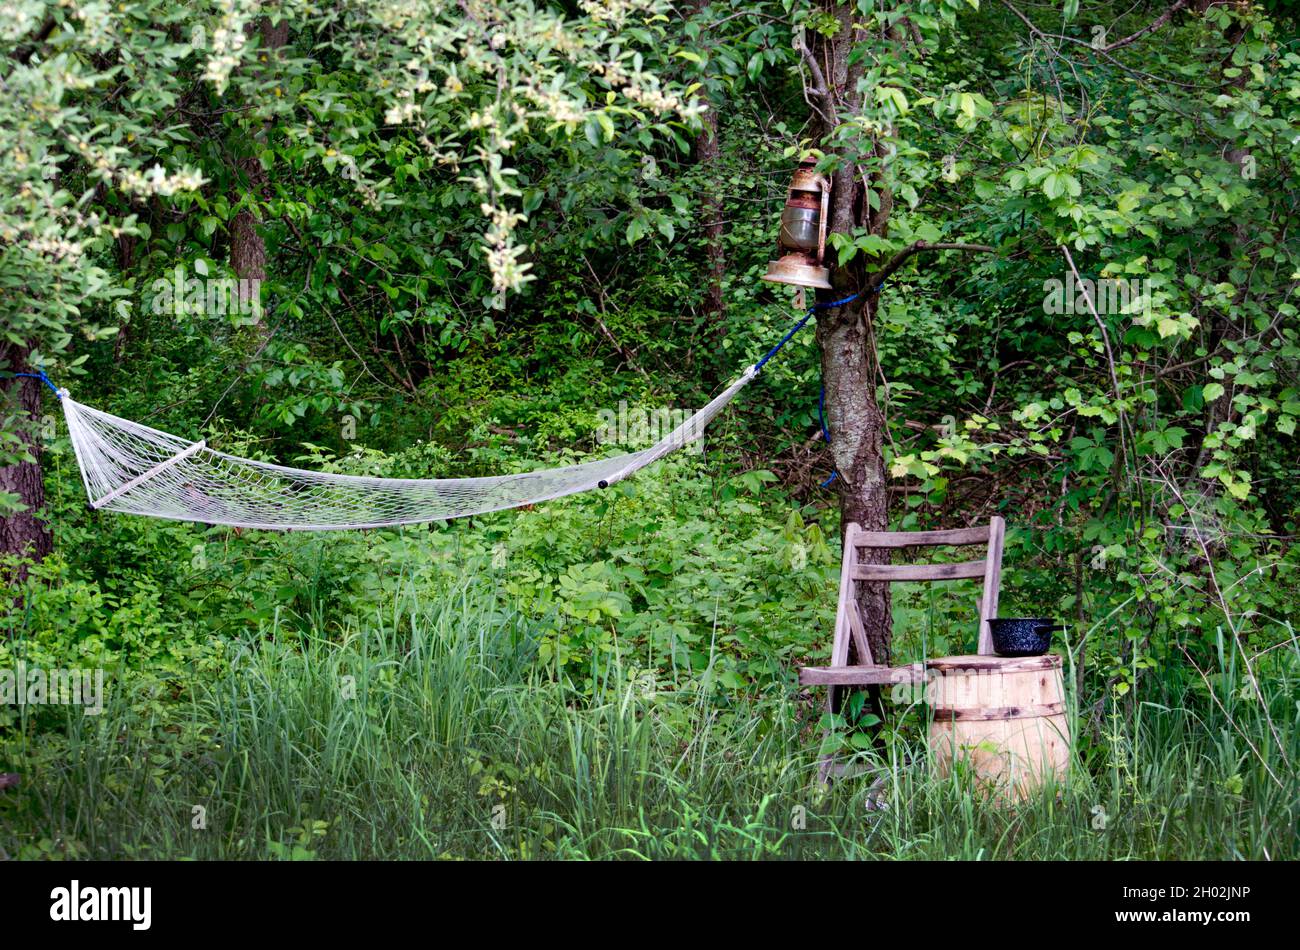 A wild woods holds a rustic camping scene, with hammock, lantern and old folding chair Stock Photo